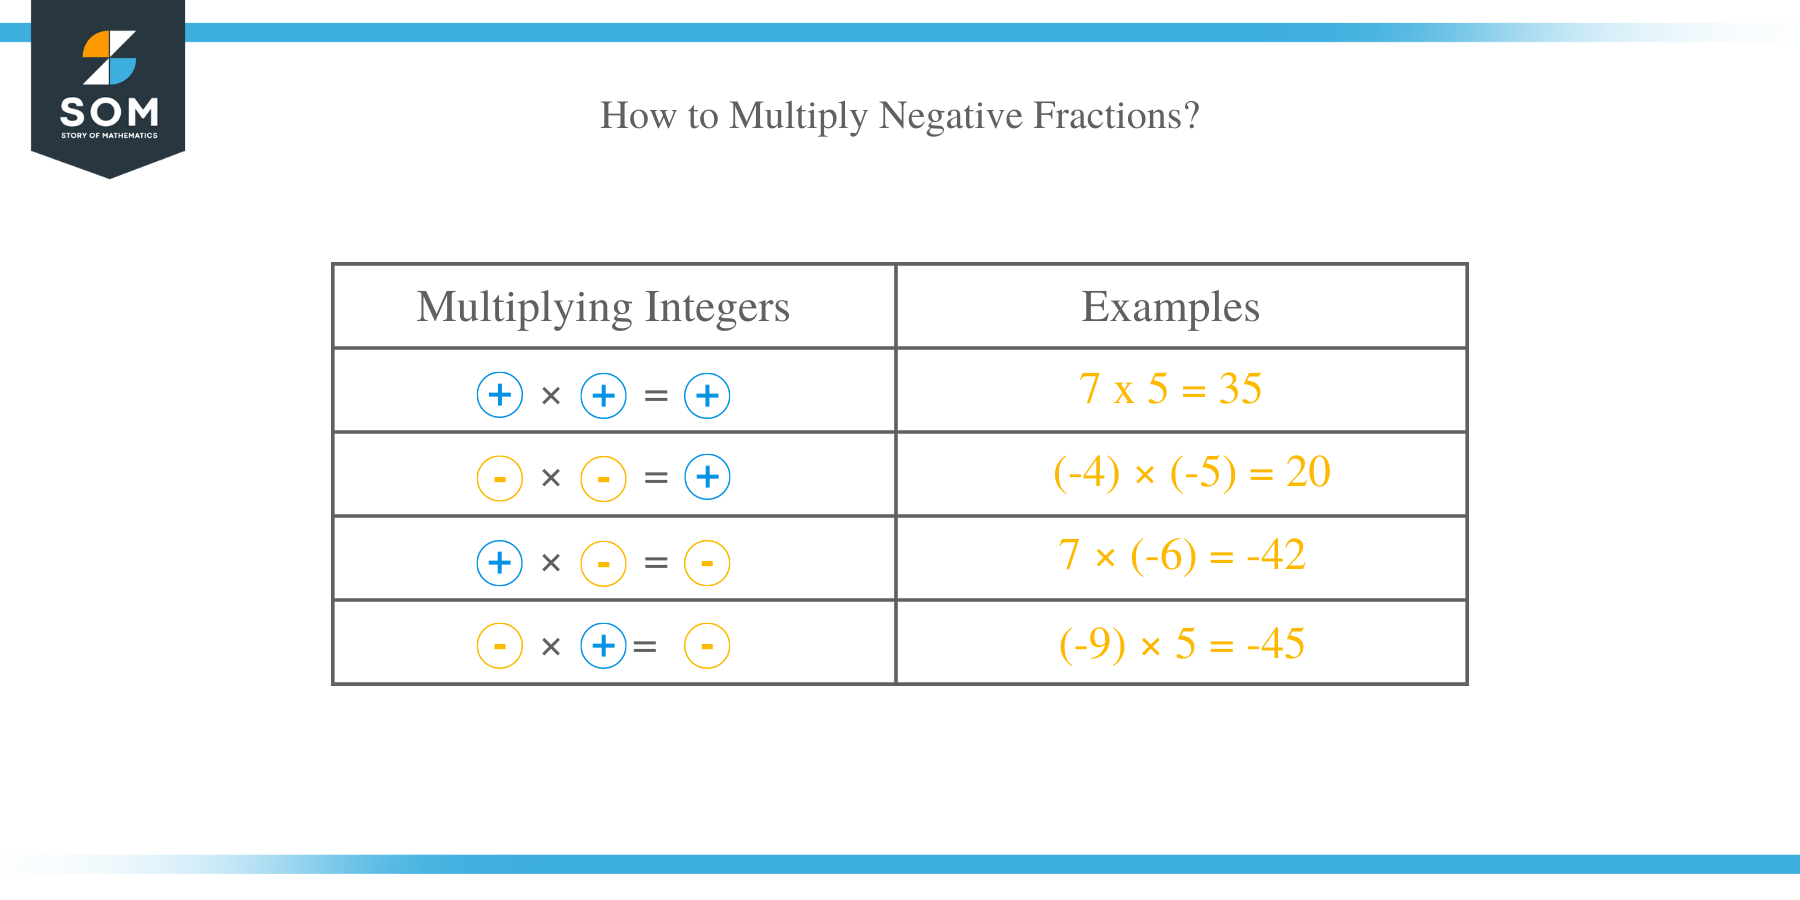 How to Multiply Negative Fractions?